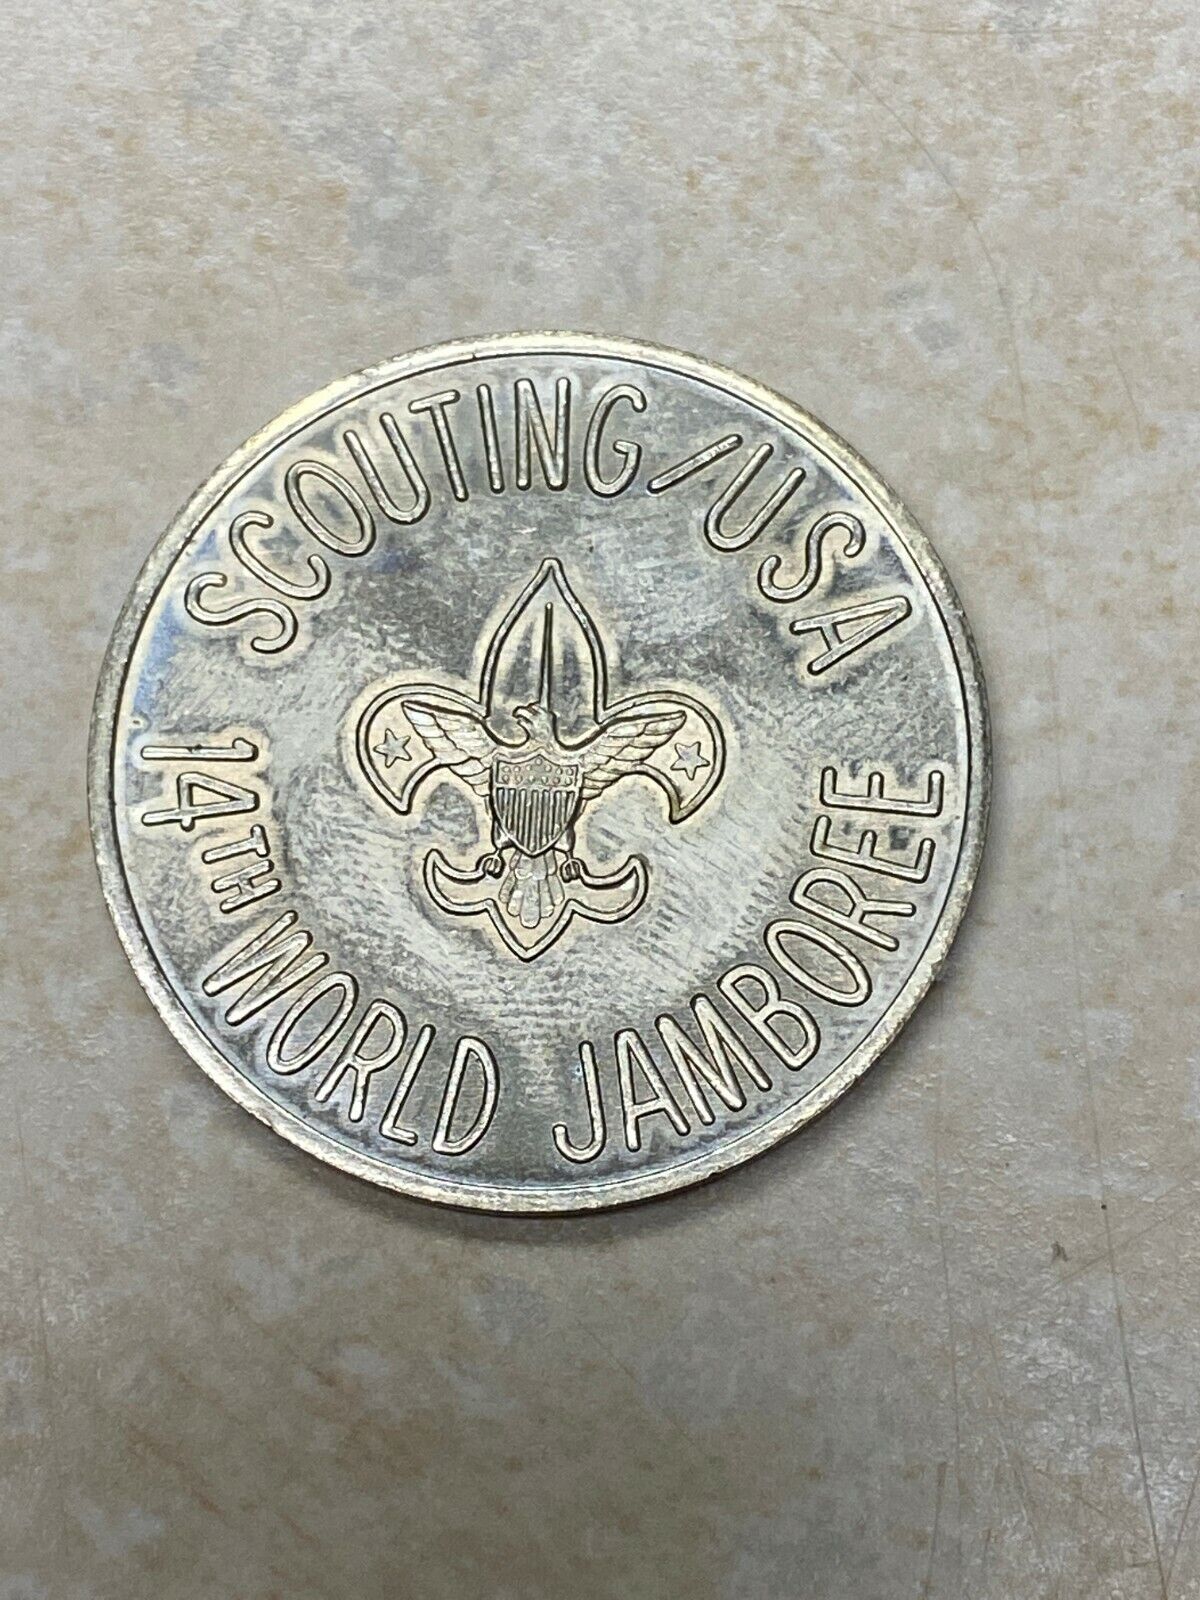 1975 14th World Jamboree USA Contingent Coin w/ Scout Law